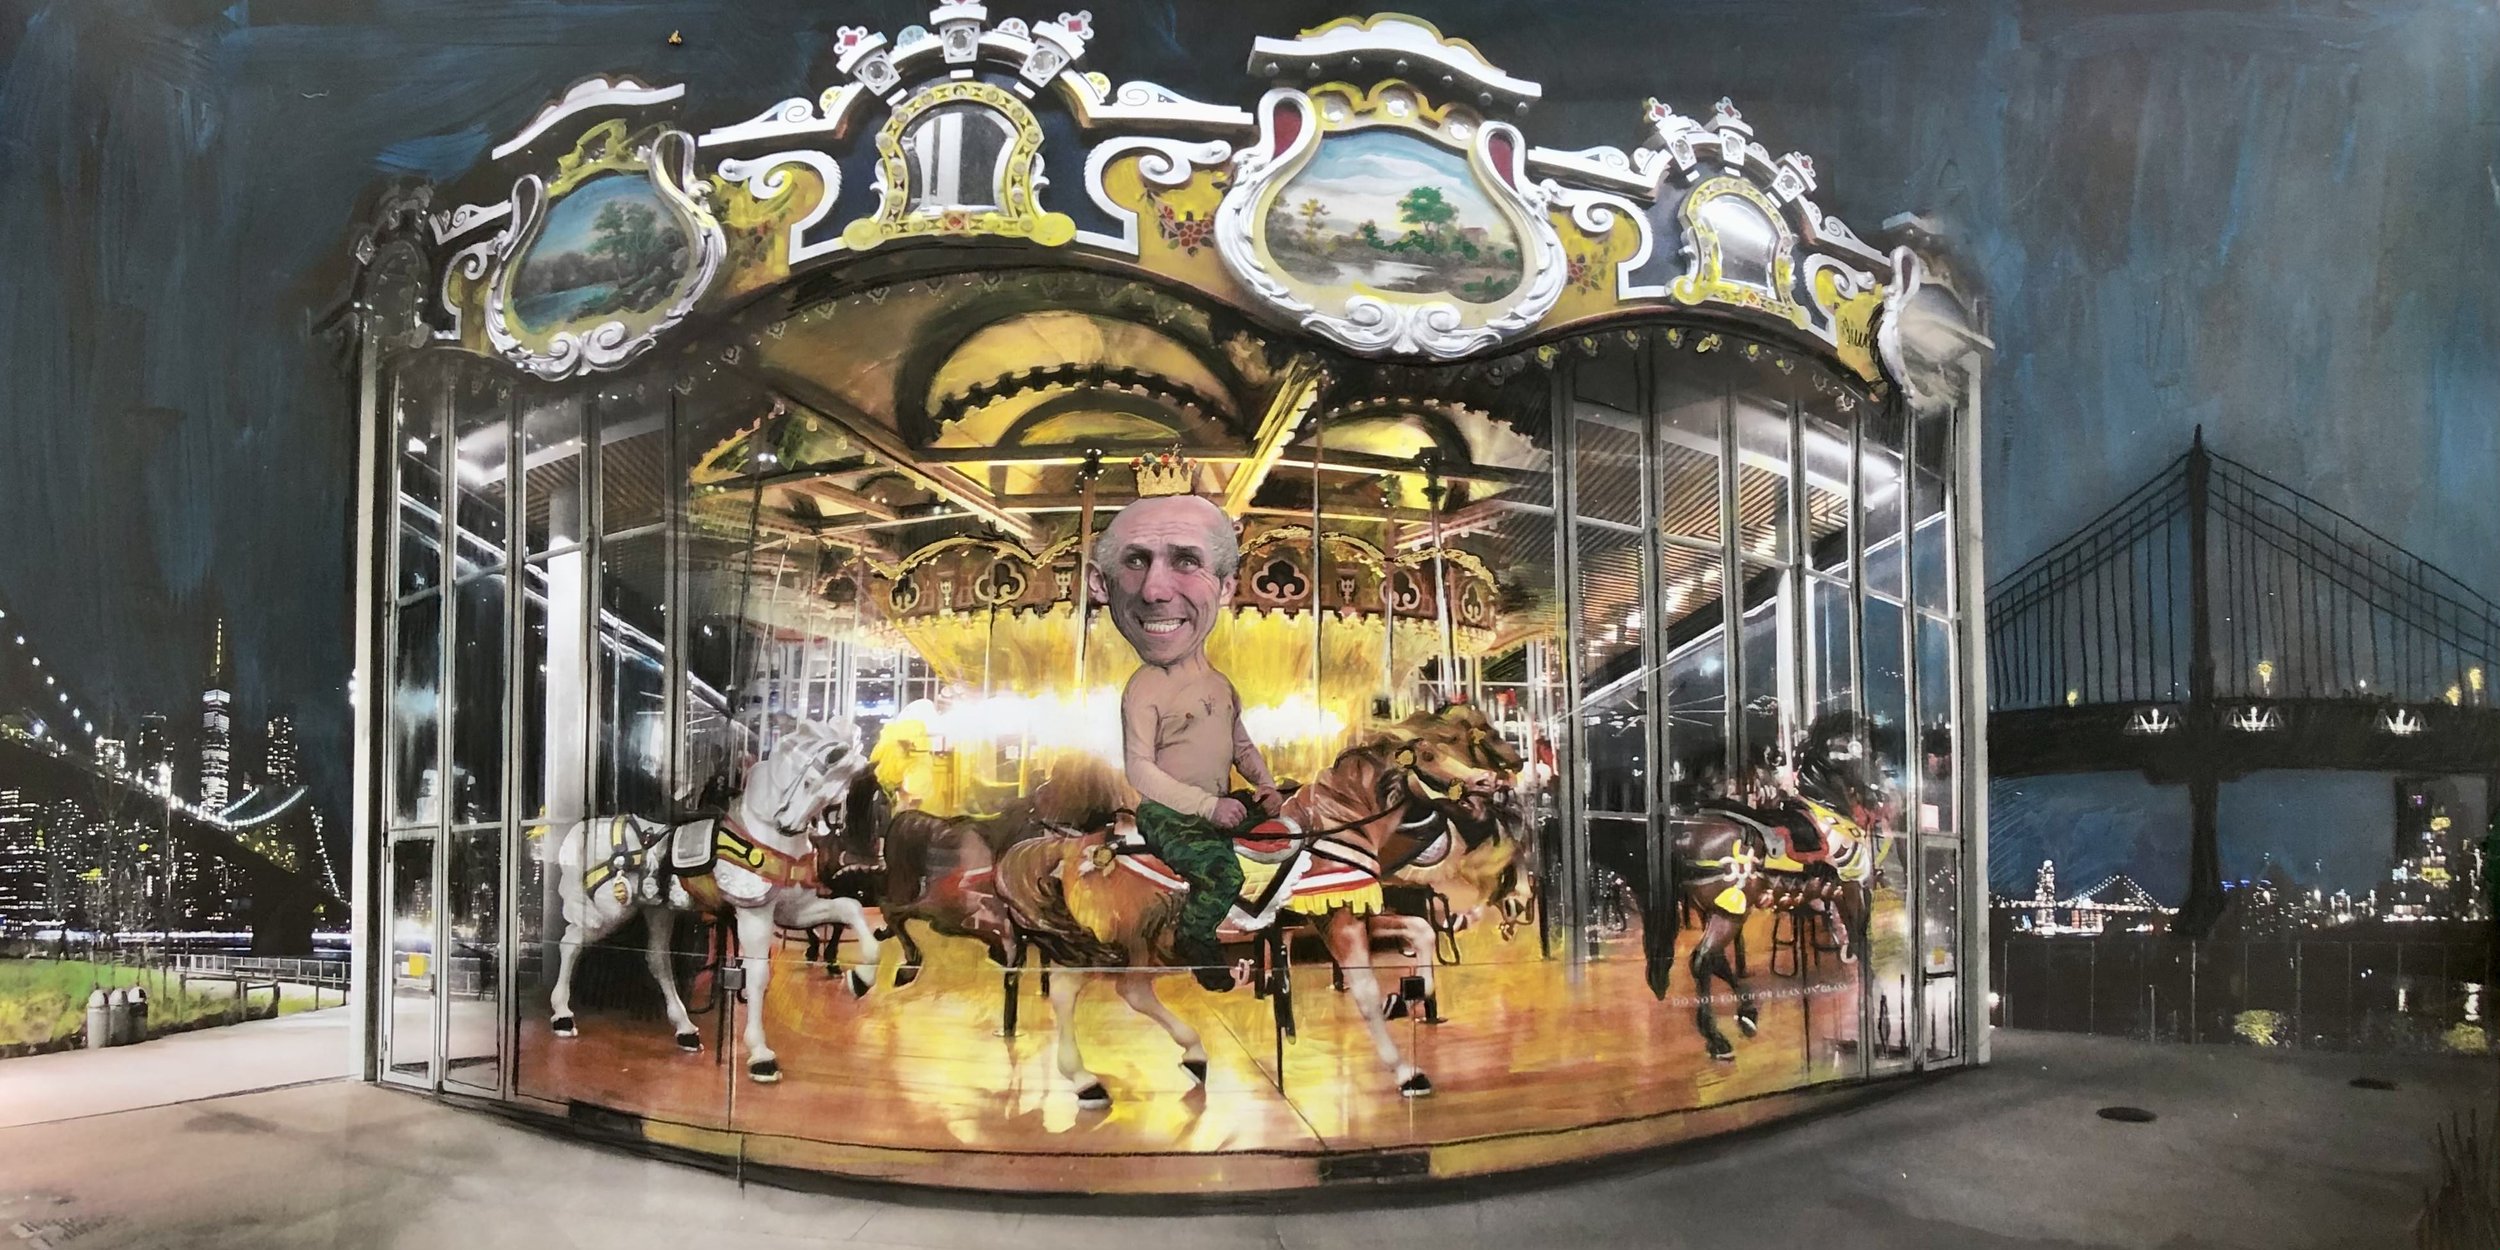   An image of Jason Bomers’ work, a painting and collage of a merry-go-round in motion, against a cityscape at night. In the center, a shirtless man in army pants and a crown rides one of the horses on the merry-go-round. His face is smiling, reminis